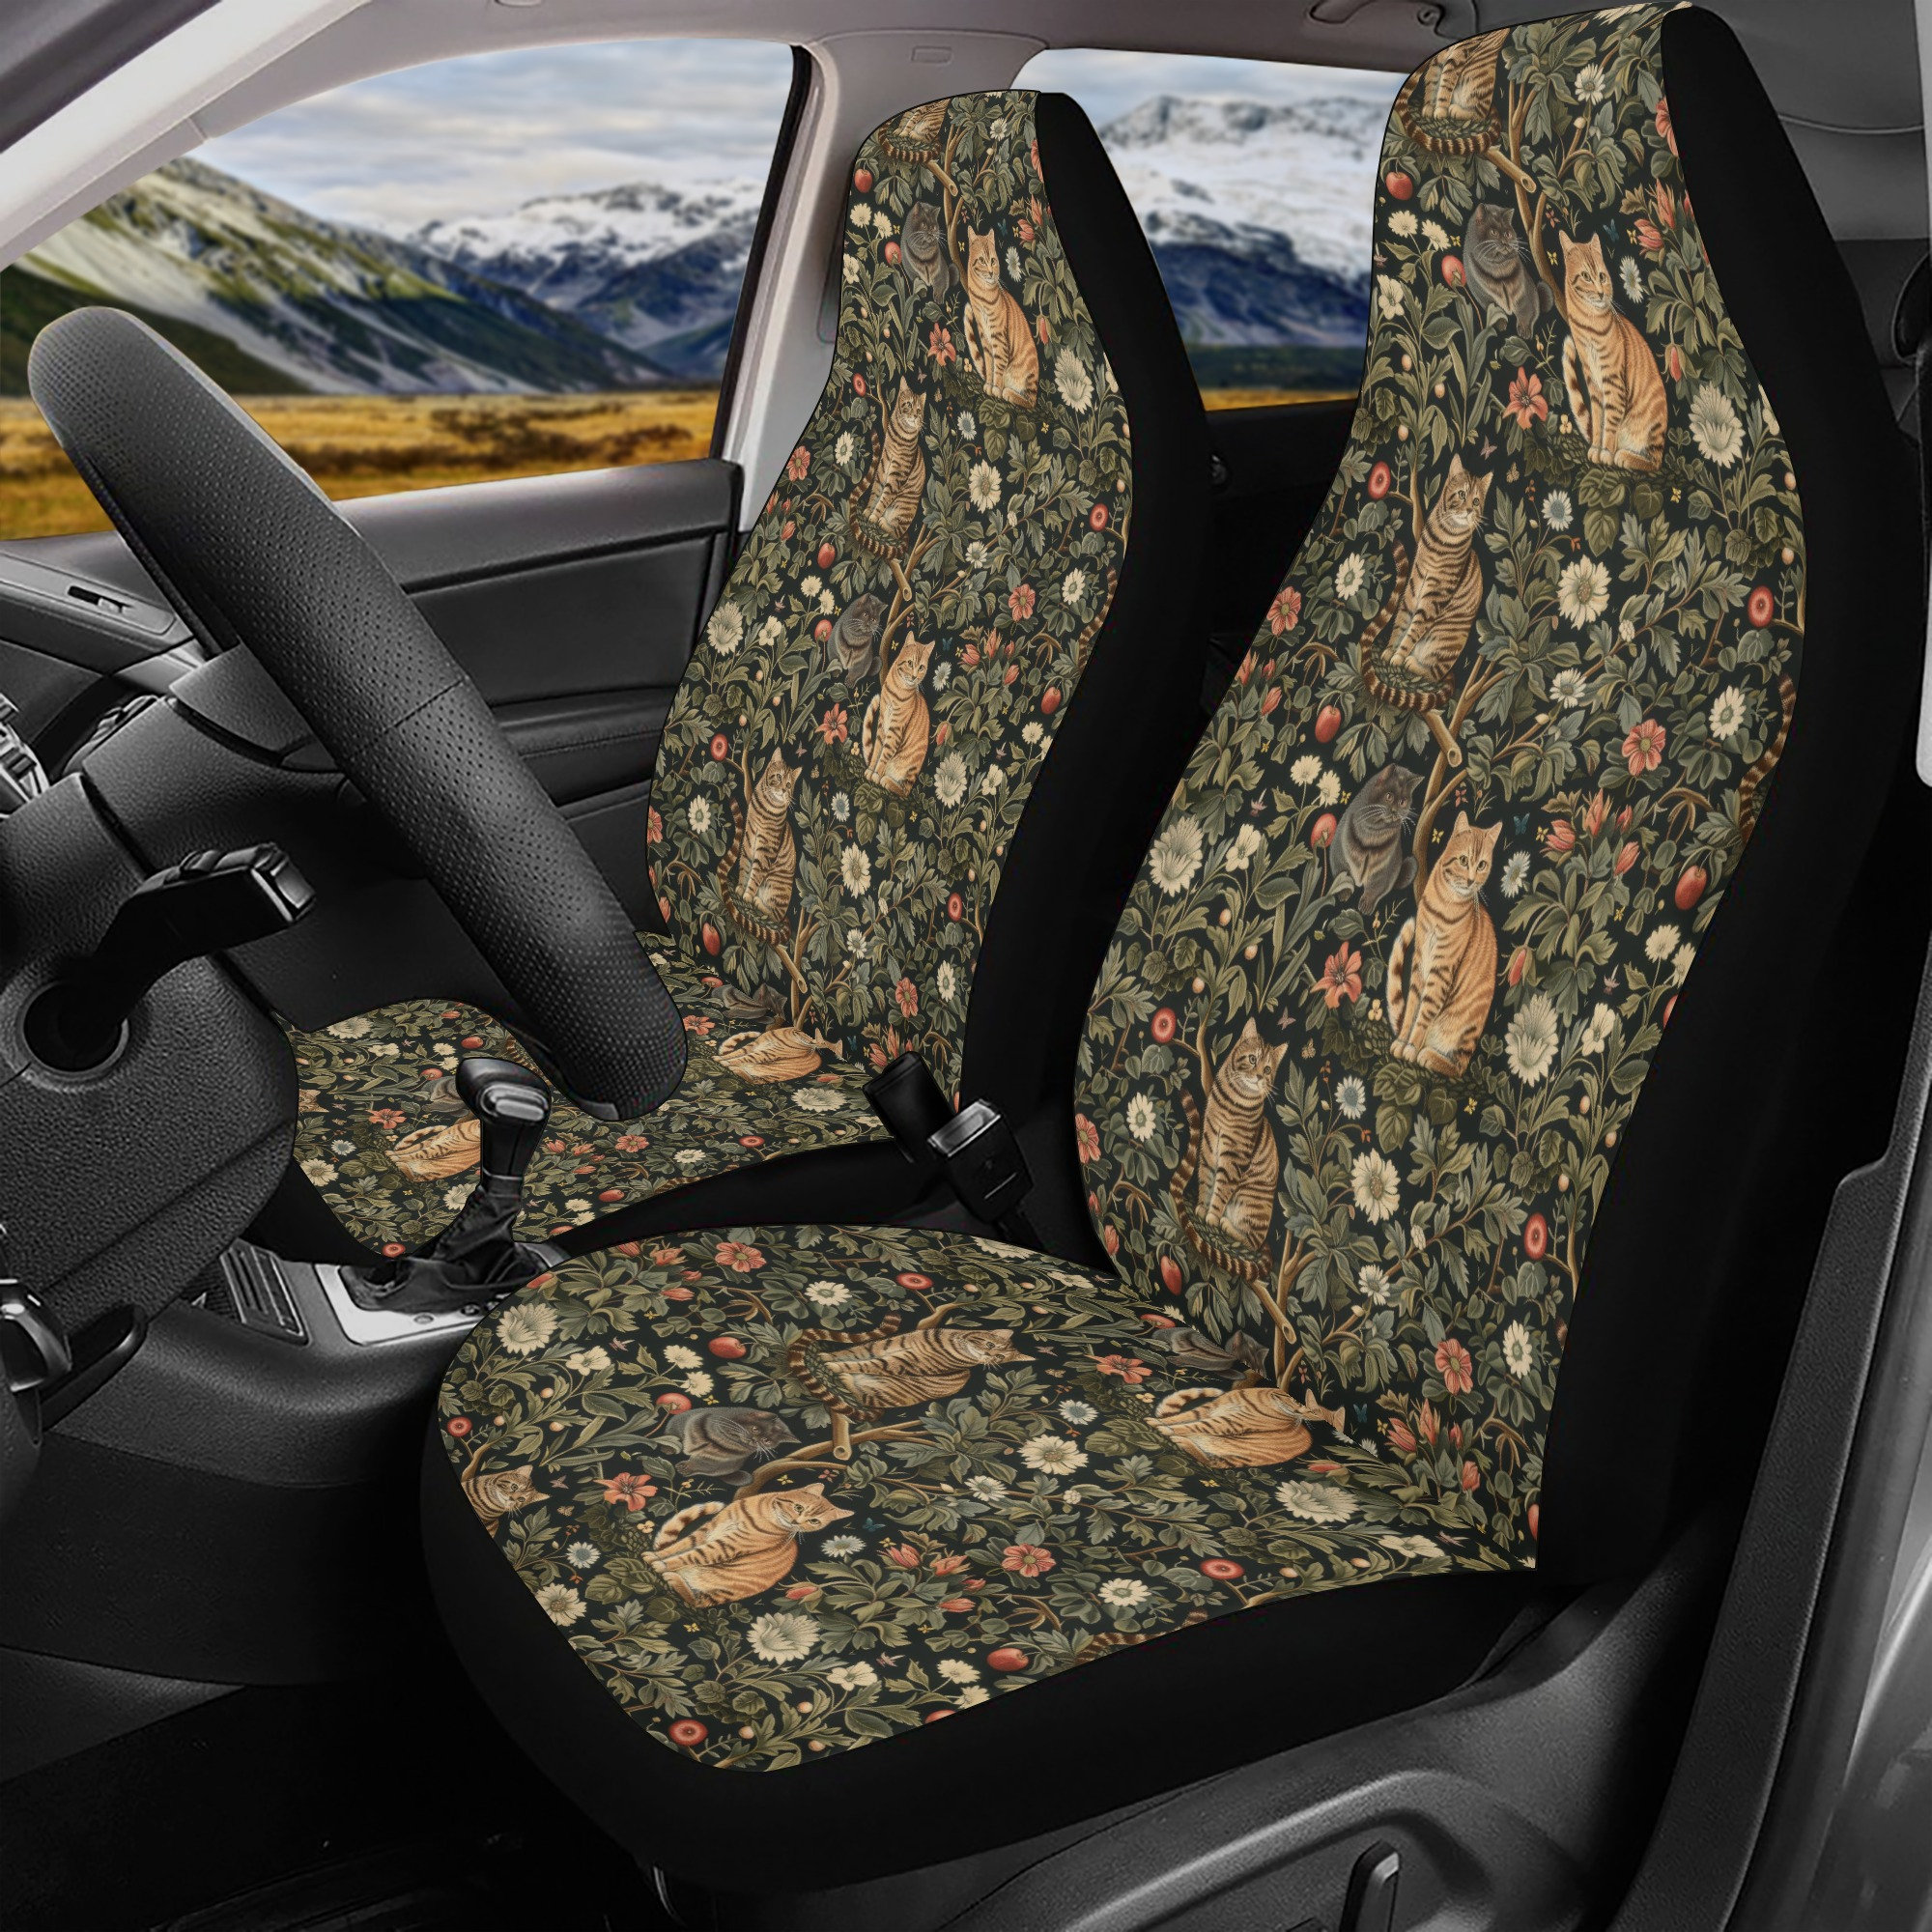 Vintage Cat Forest Car Seat Cover Set, Boho Cat Floral Front And Back Seat Covers For Vehicle, Steering Wheel Cover, Car Decor Gift